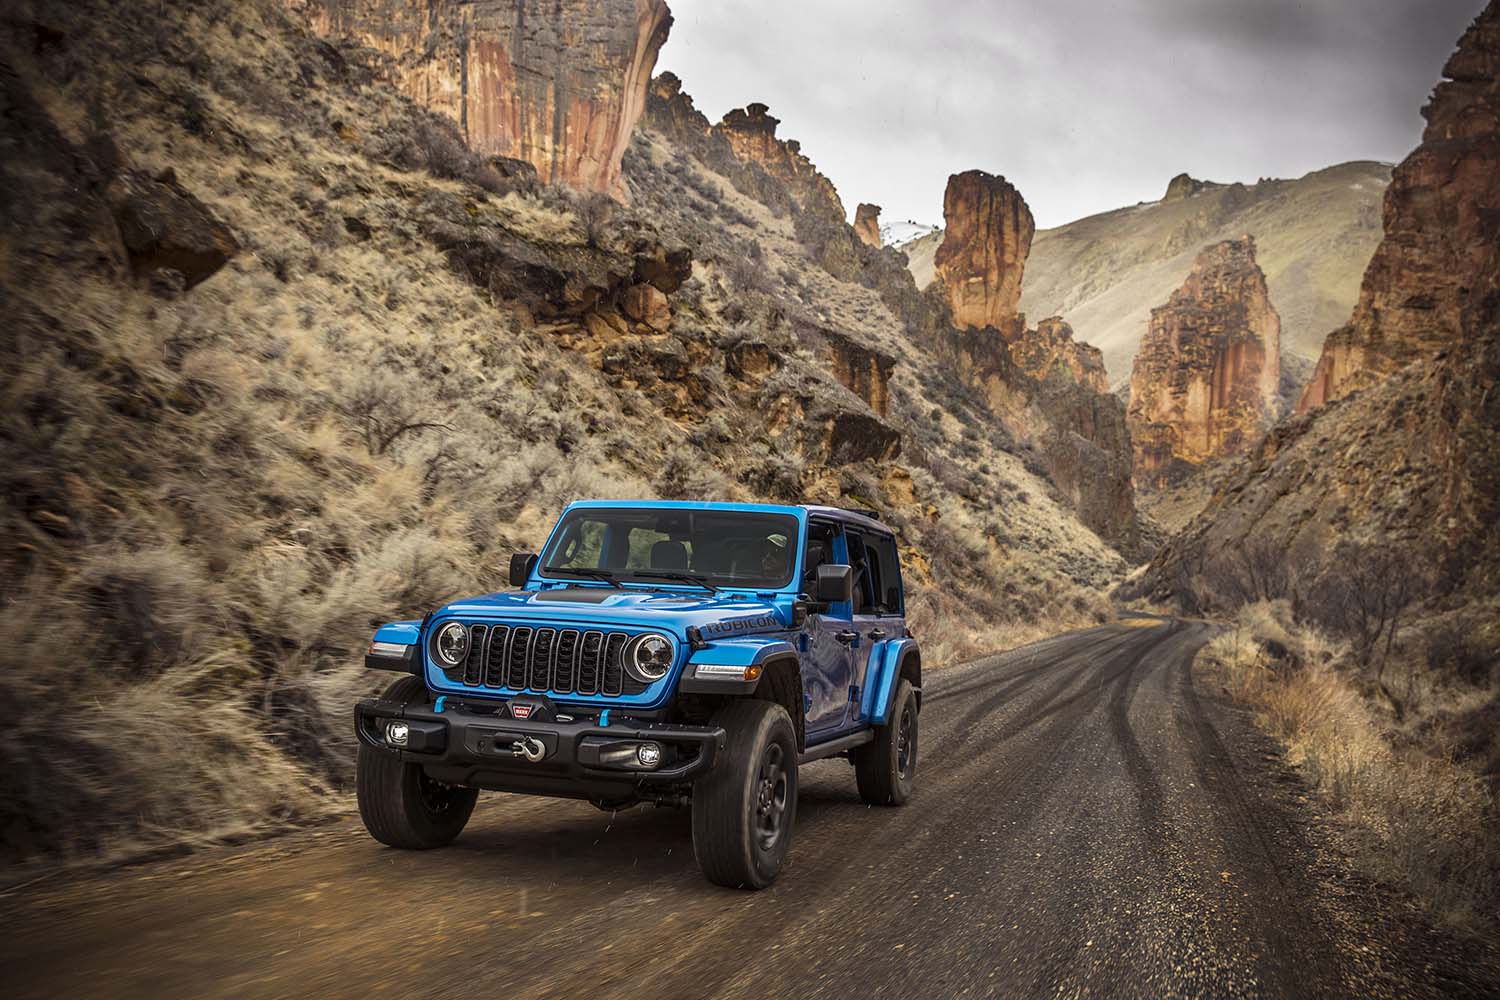 Jeep Wrangler Rubicon X4 in bright blue driving along canyon road